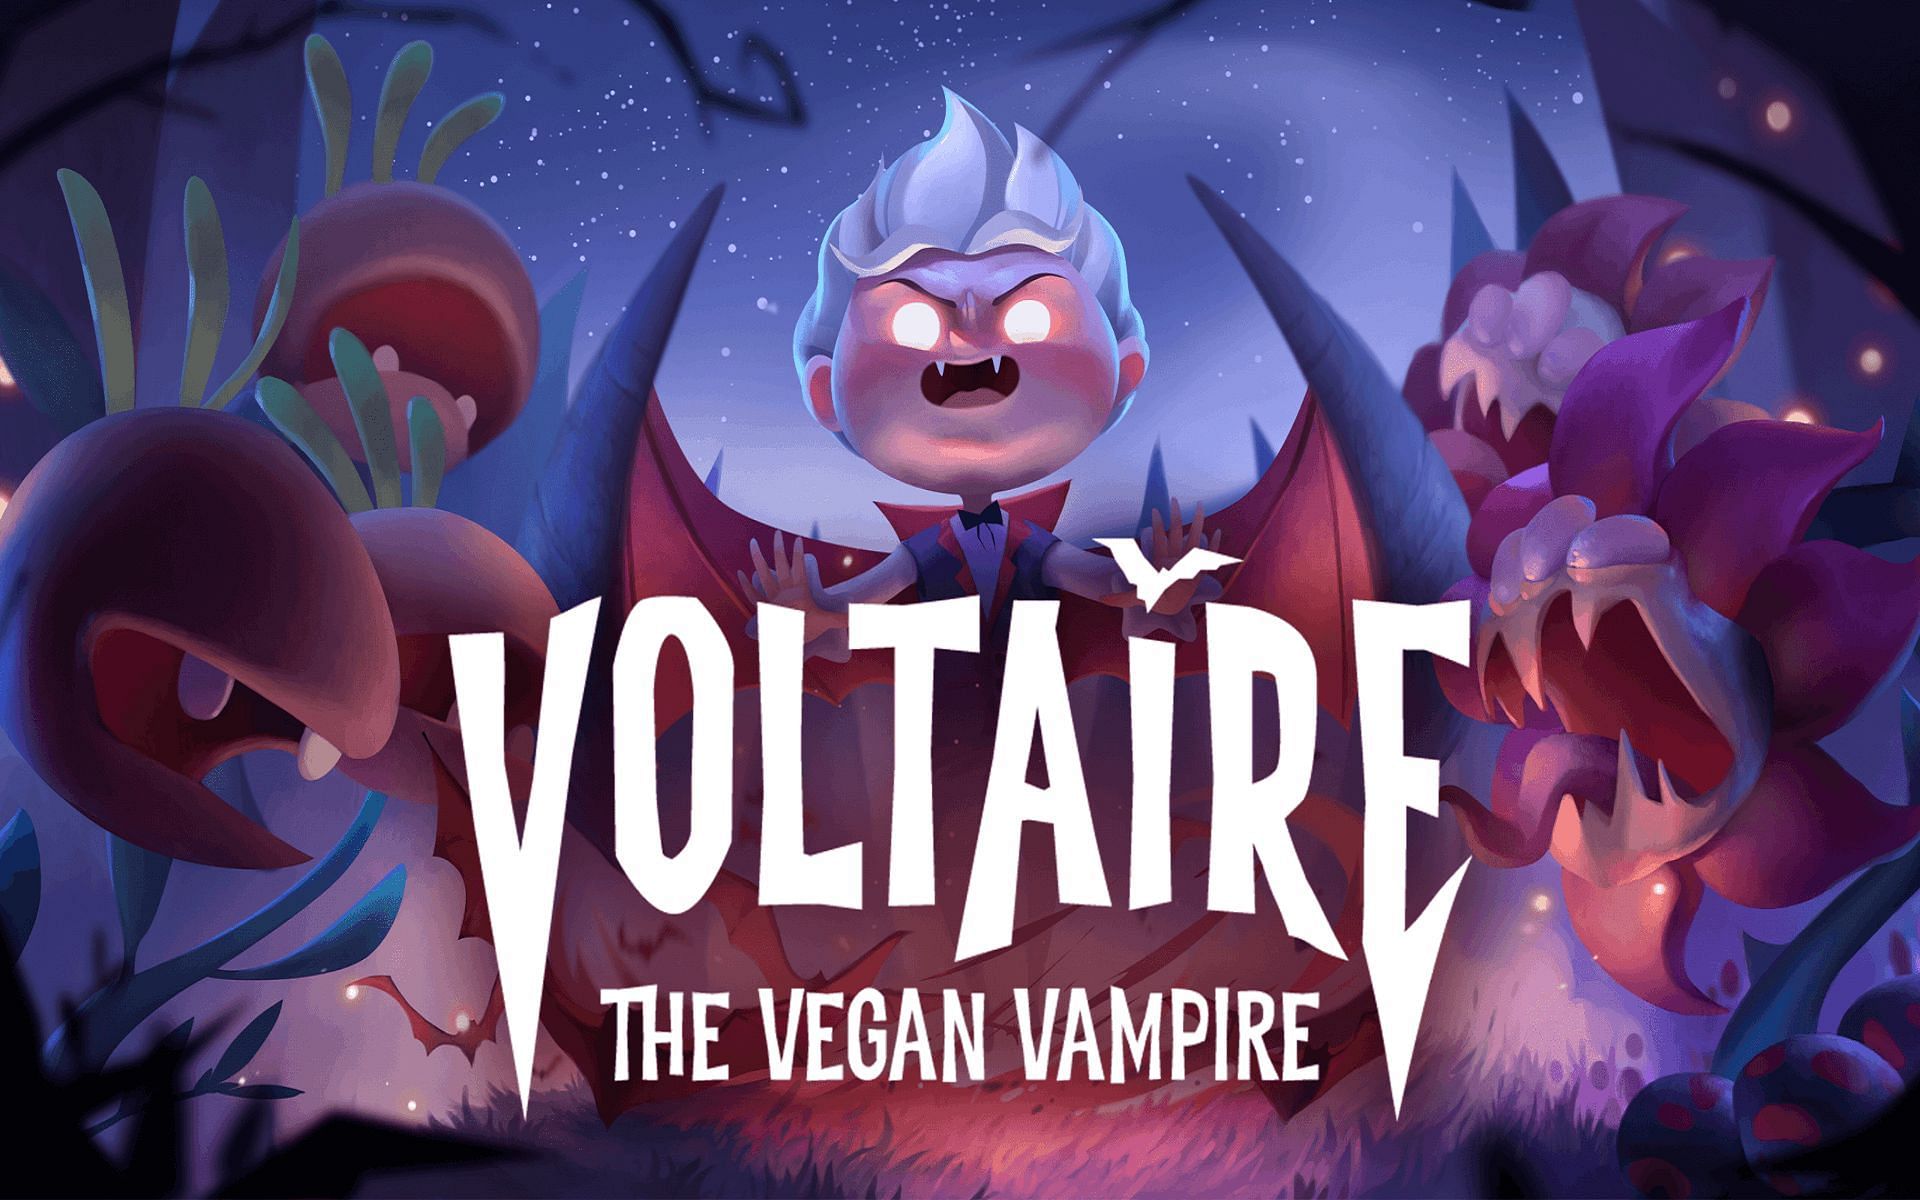 A comprehensive review of Voltaire - The Vegan Vampire (Image via Digitality Games)